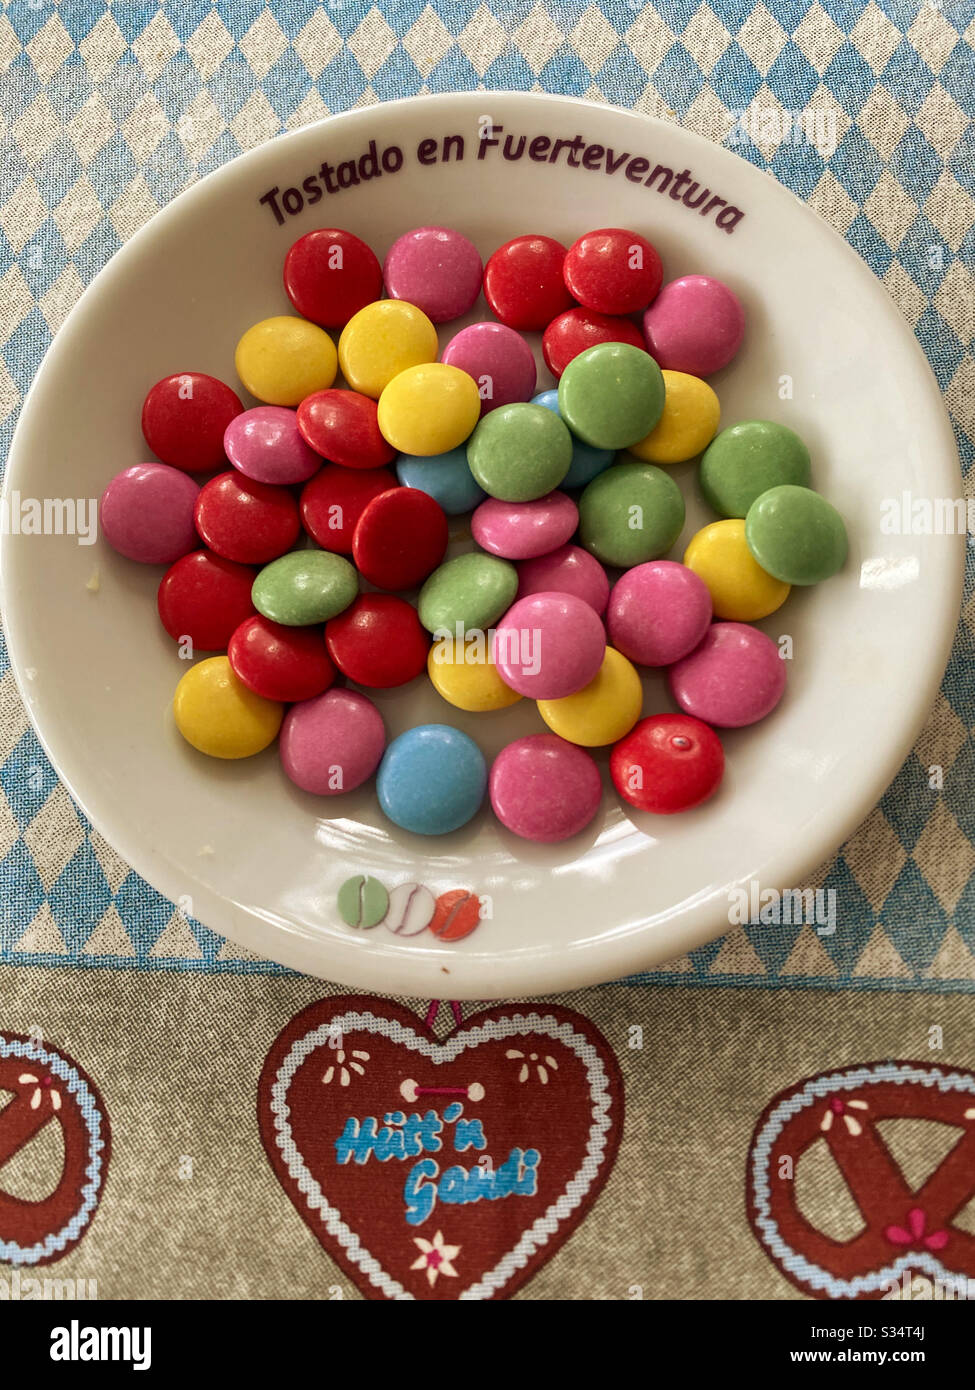 Sweeties and candy. Stock Photo